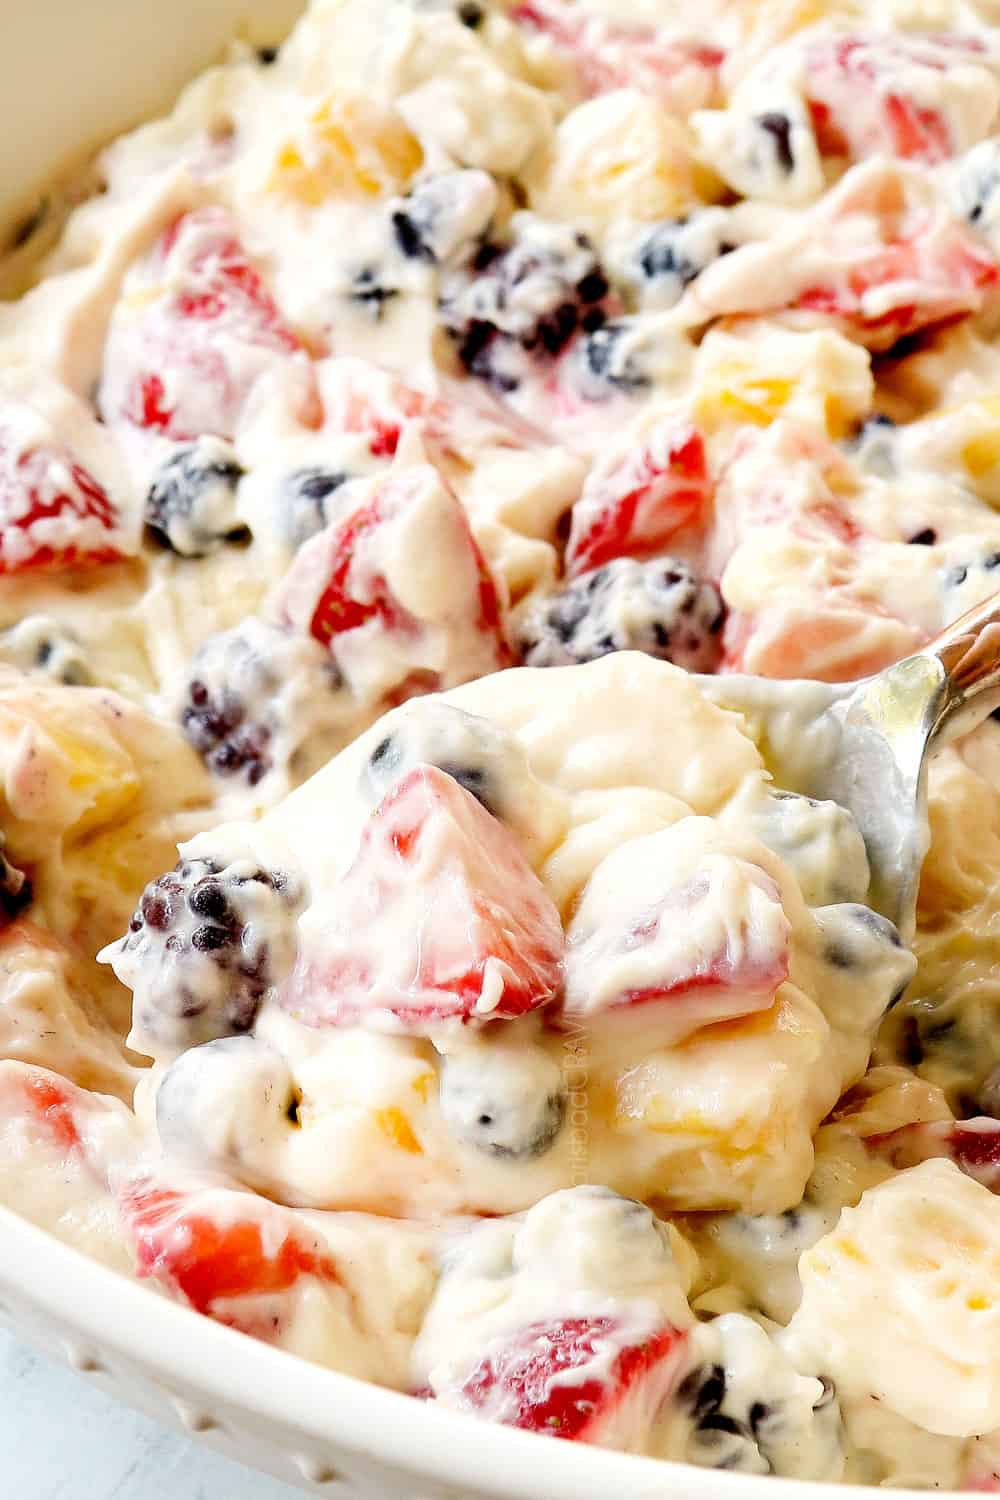 up close of a spoonful of cheesecake salad with strawberries and bananas showing how rich and creamy it is